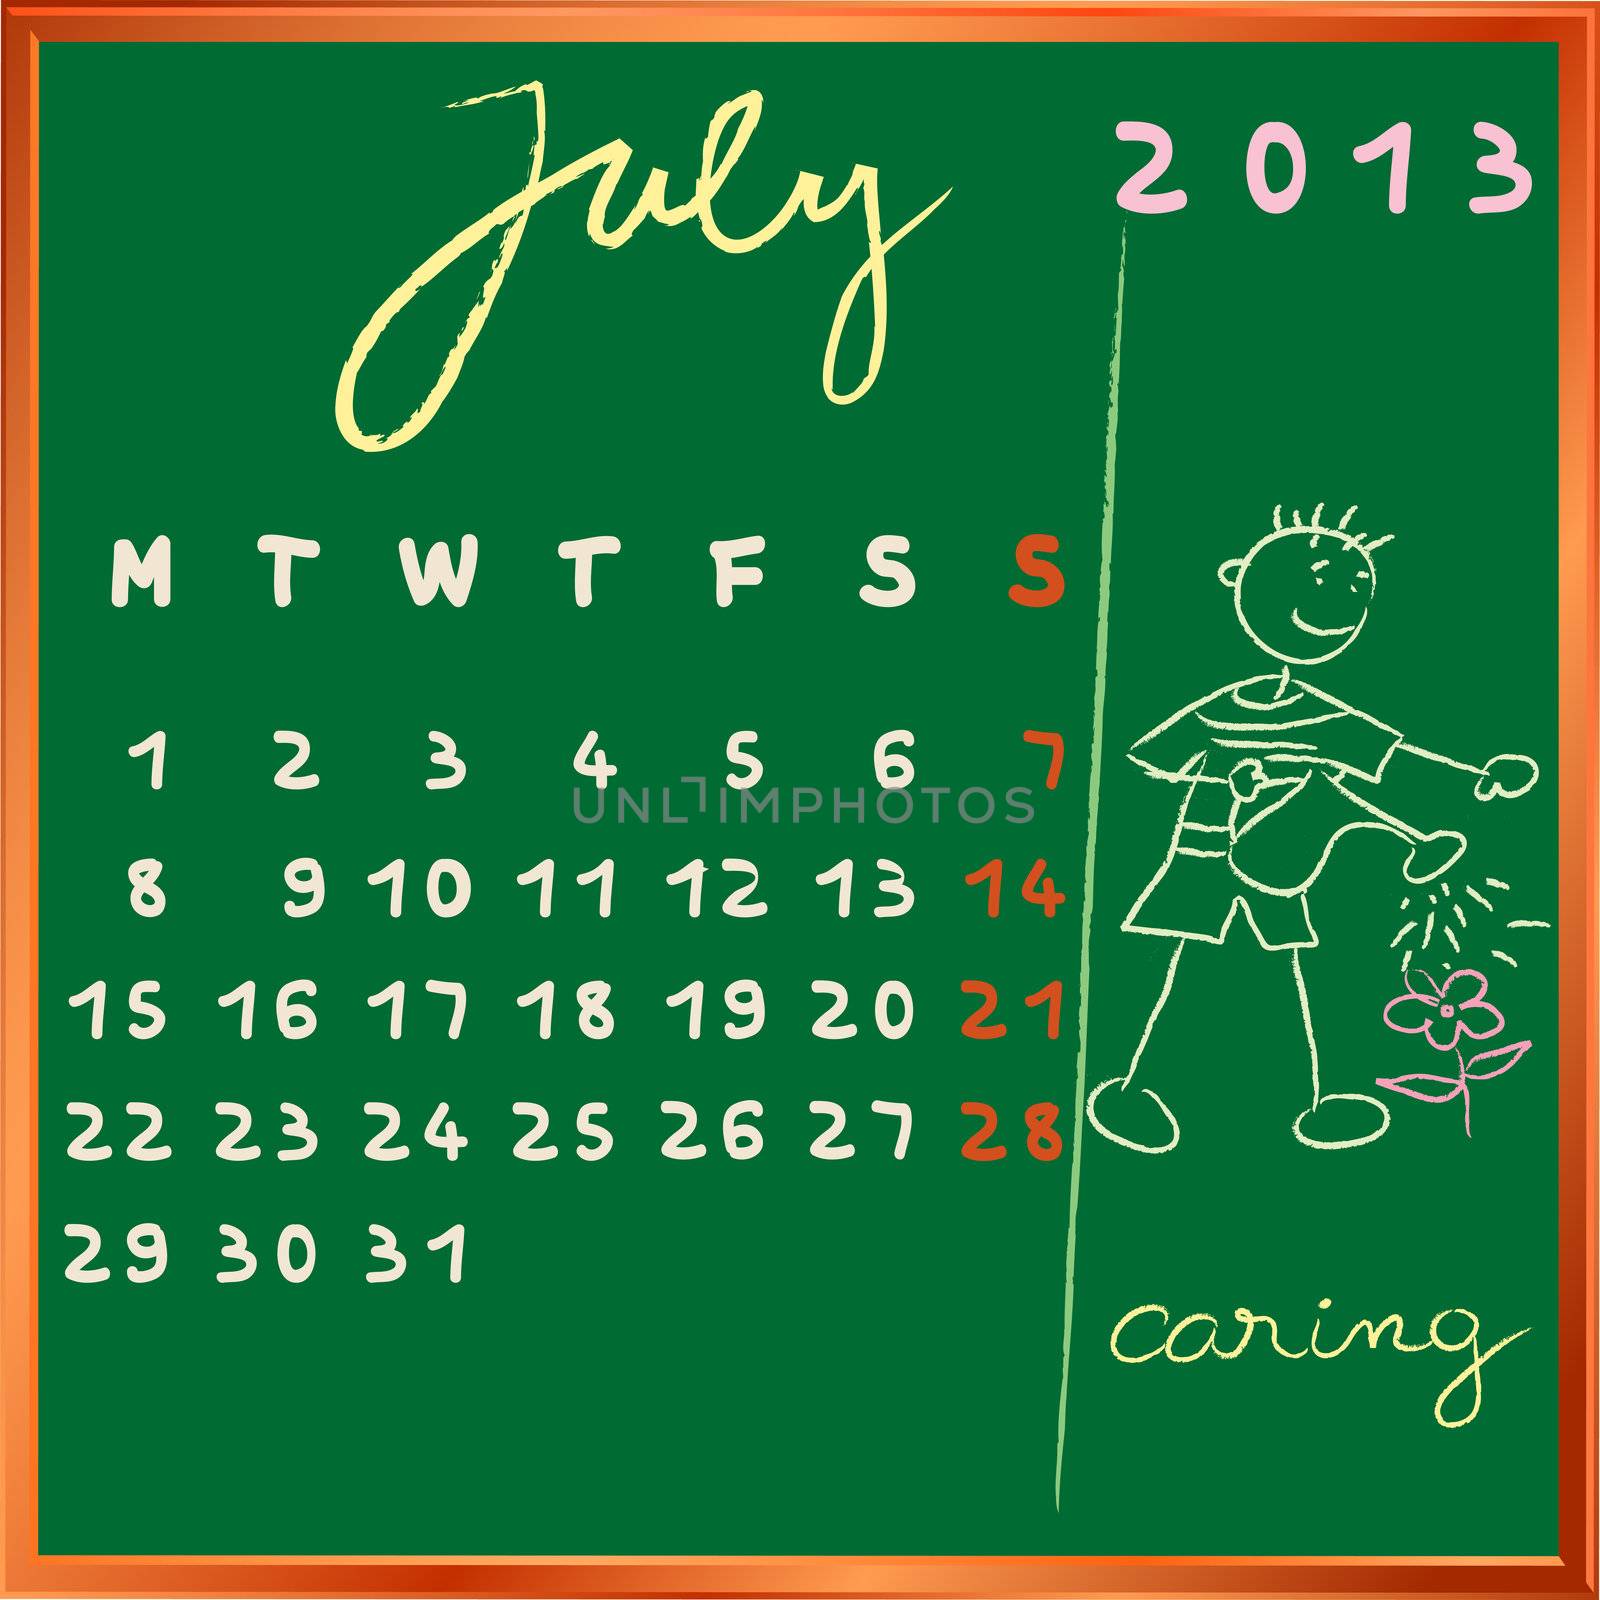 2013 calendar on a chalkboard, july design with the caring student profile for international schools